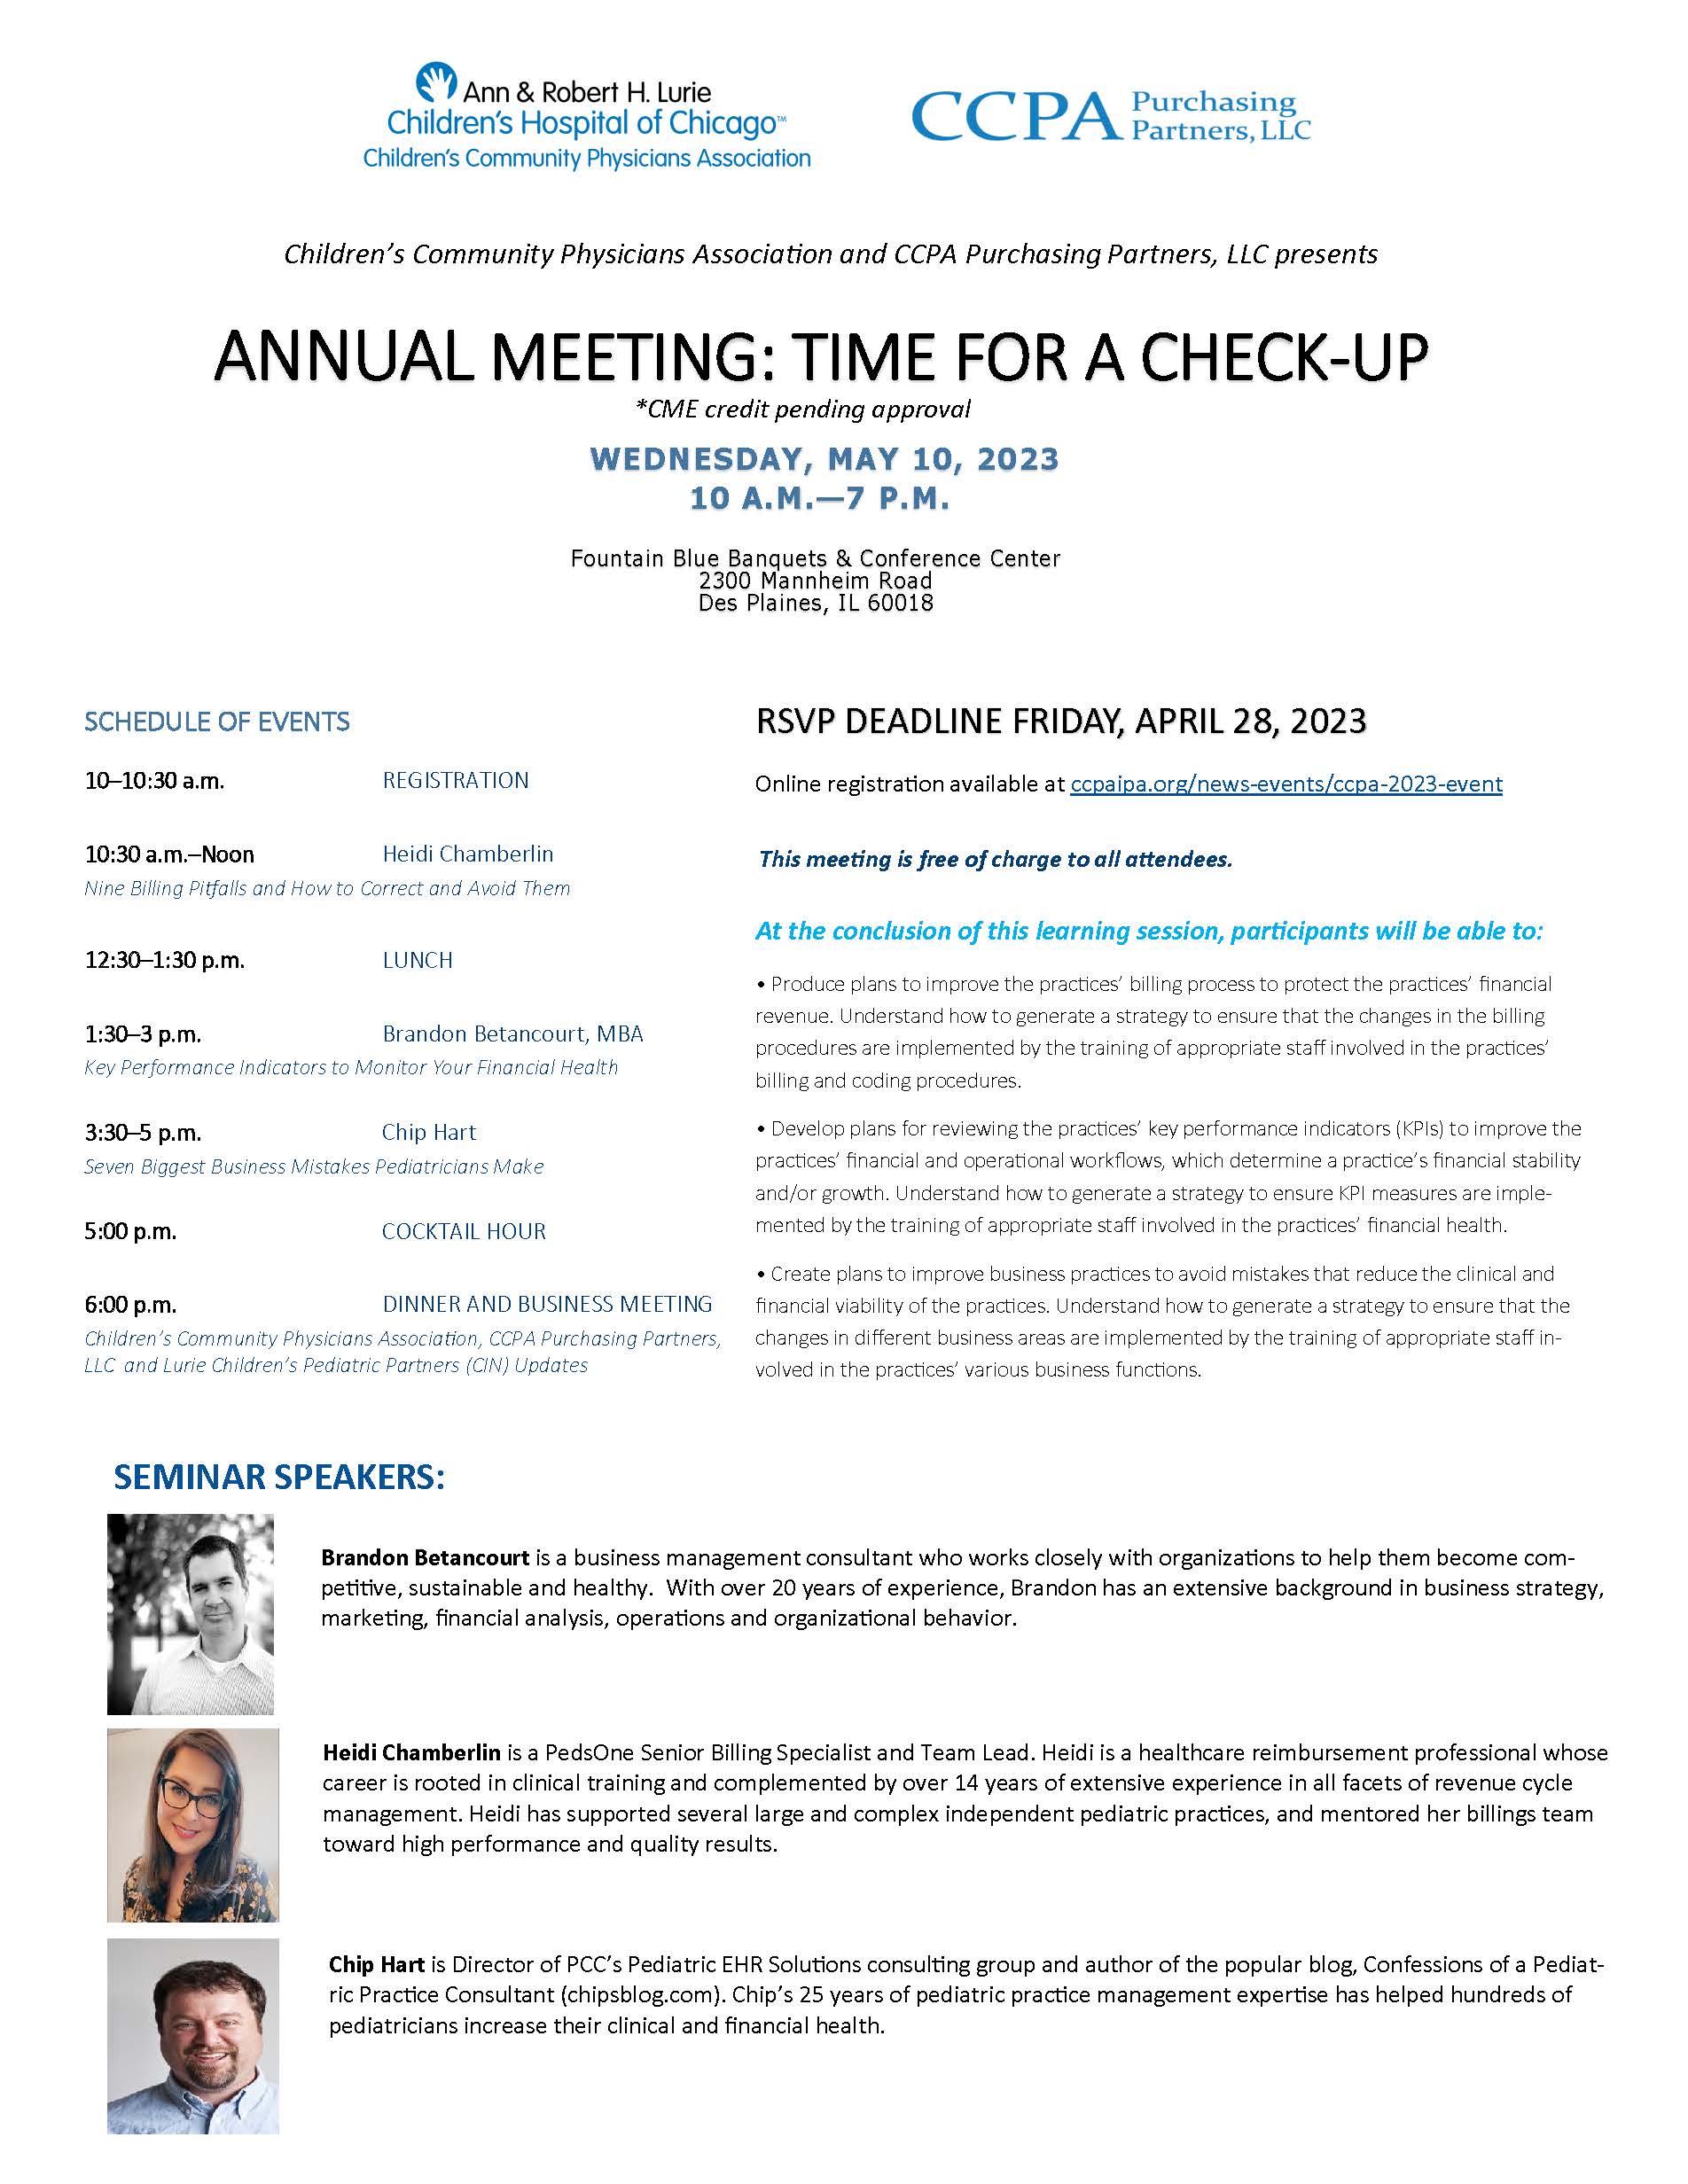 Time for a check-up/ annual meeting